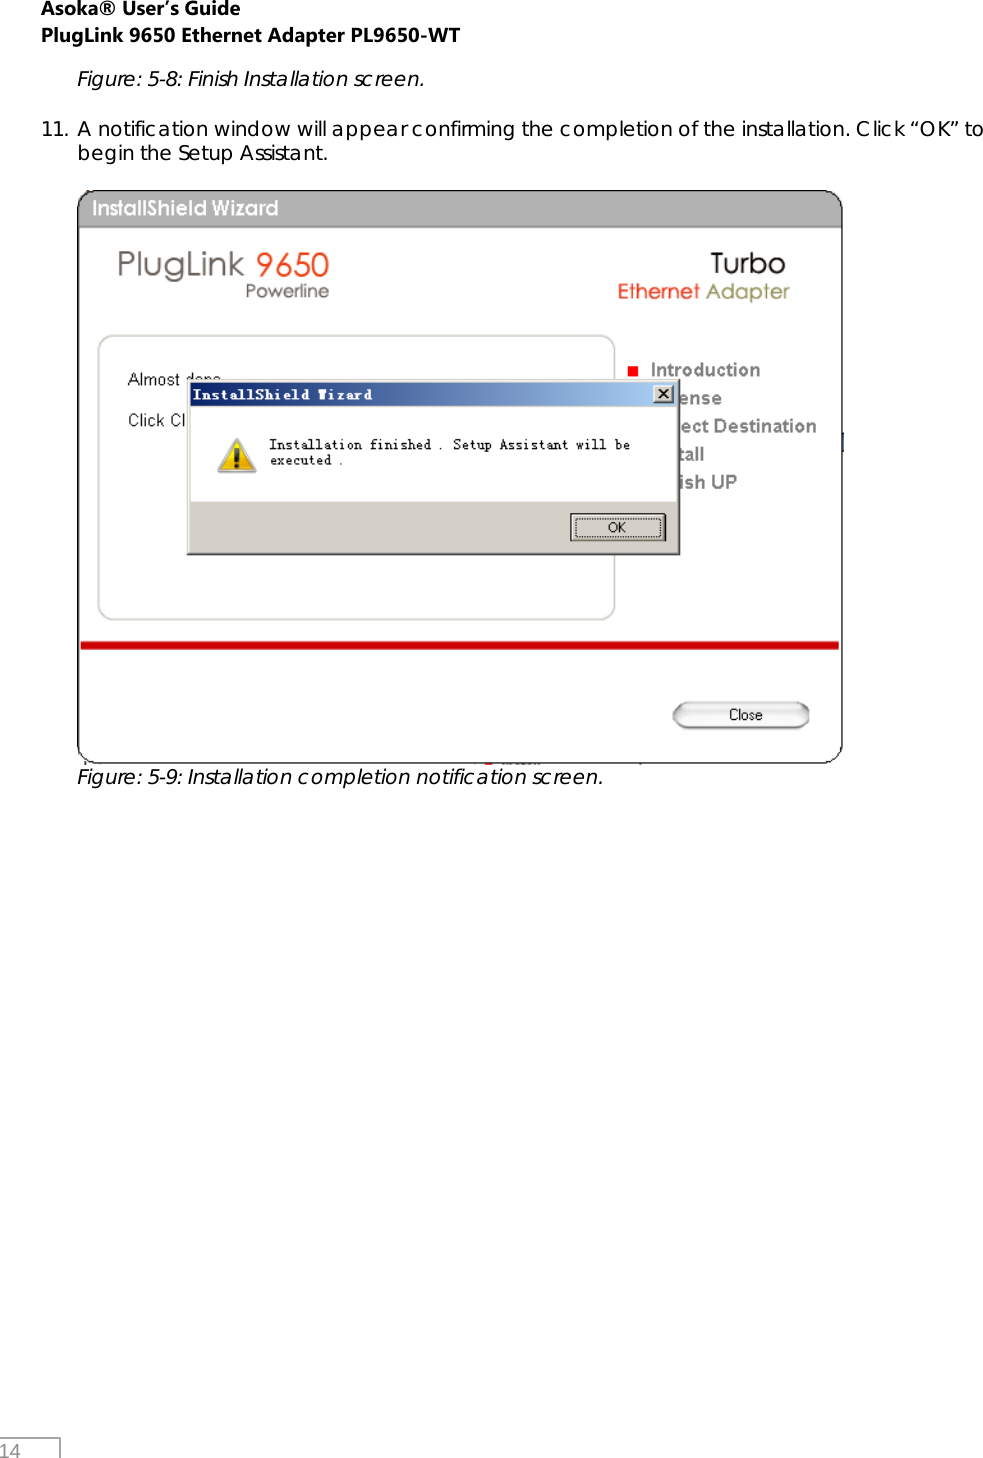 Asoka® User’s Guide PlugLink 9650 Ethernet Adapter PL9650-WT   14 Figure: 5-8: Finish Installation screen.  11. A notification window will appear confirming the completion of the installation. Click “OK” to begin the Setup Assistant.   Figure: 5-9: Installation completion notification screen.   